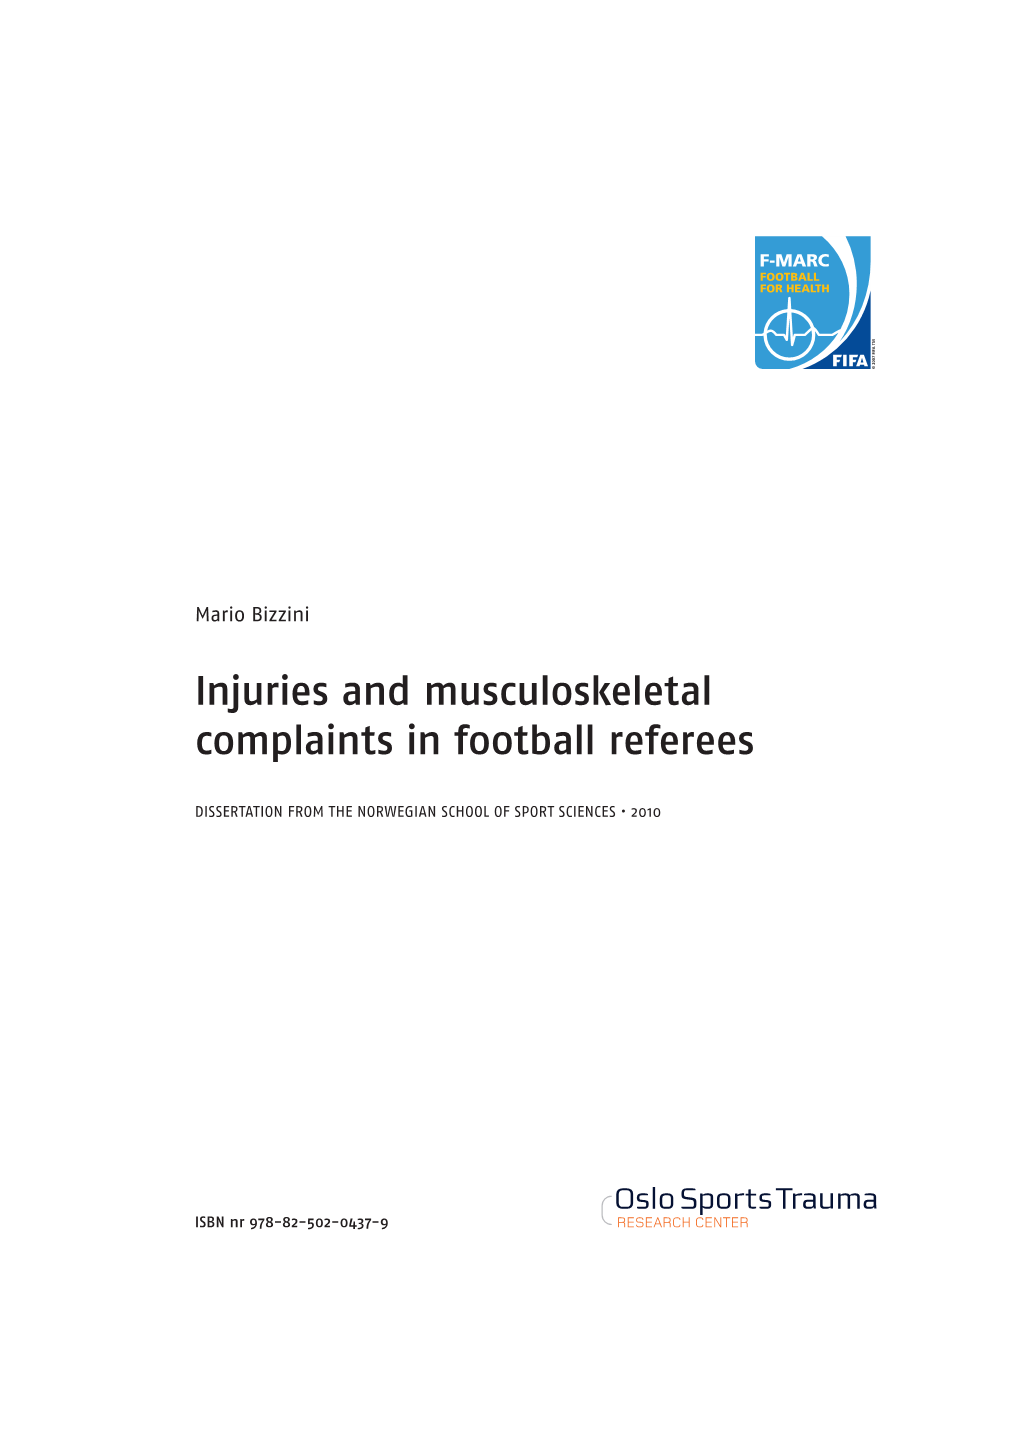 Injuries and Musculoskeletal Complaints in Football Referees